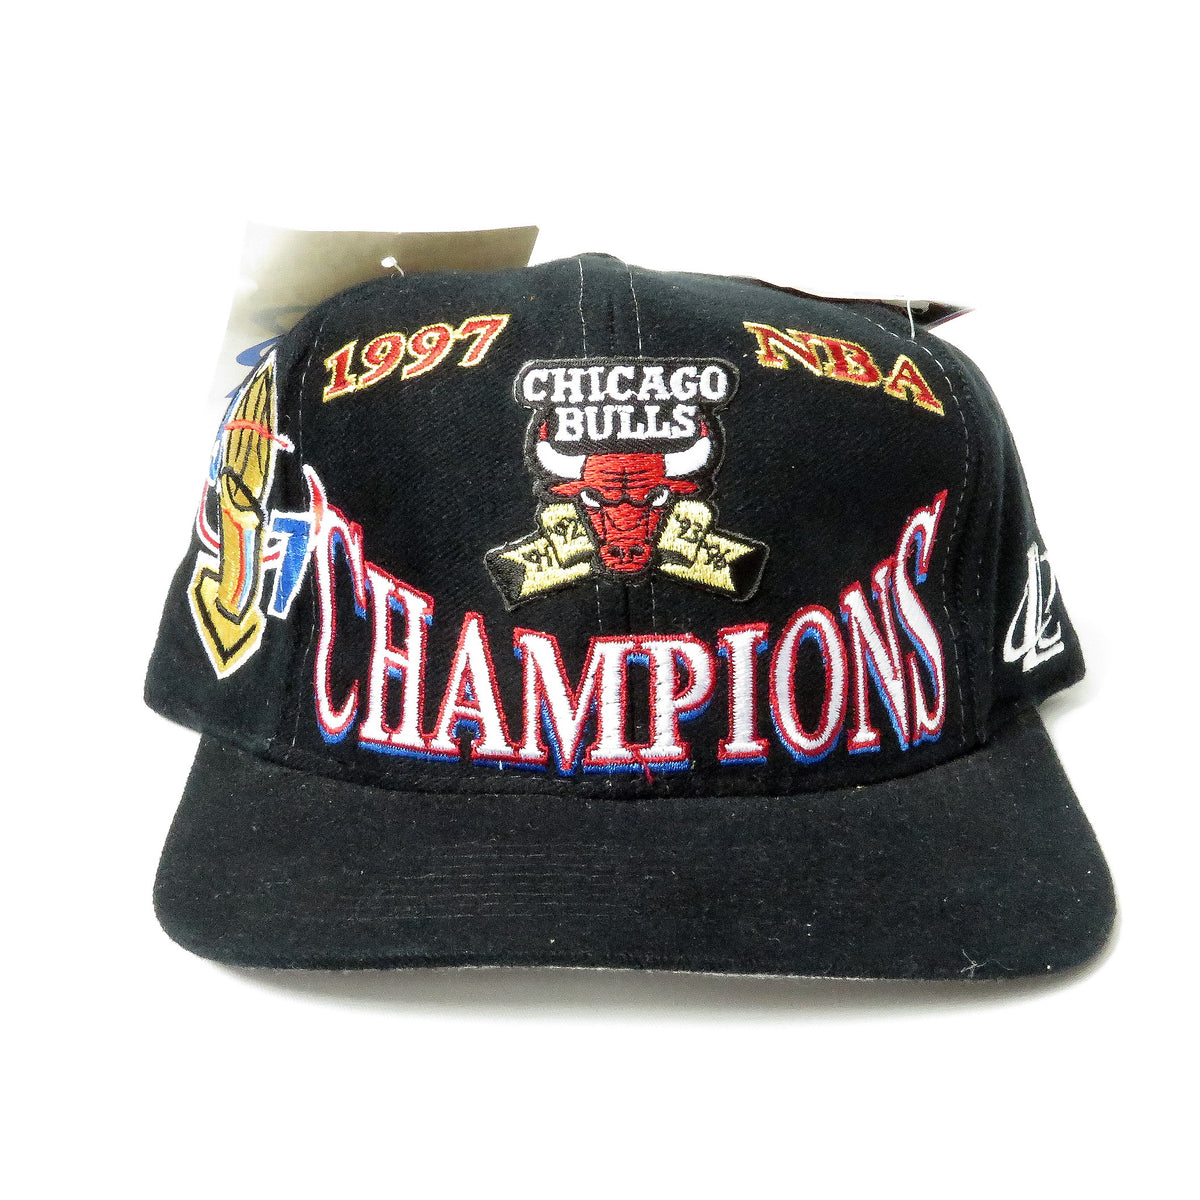 Vintage Chicago Bulls 1997 NBA Champions Snap Back Cap/Hat New With Tags